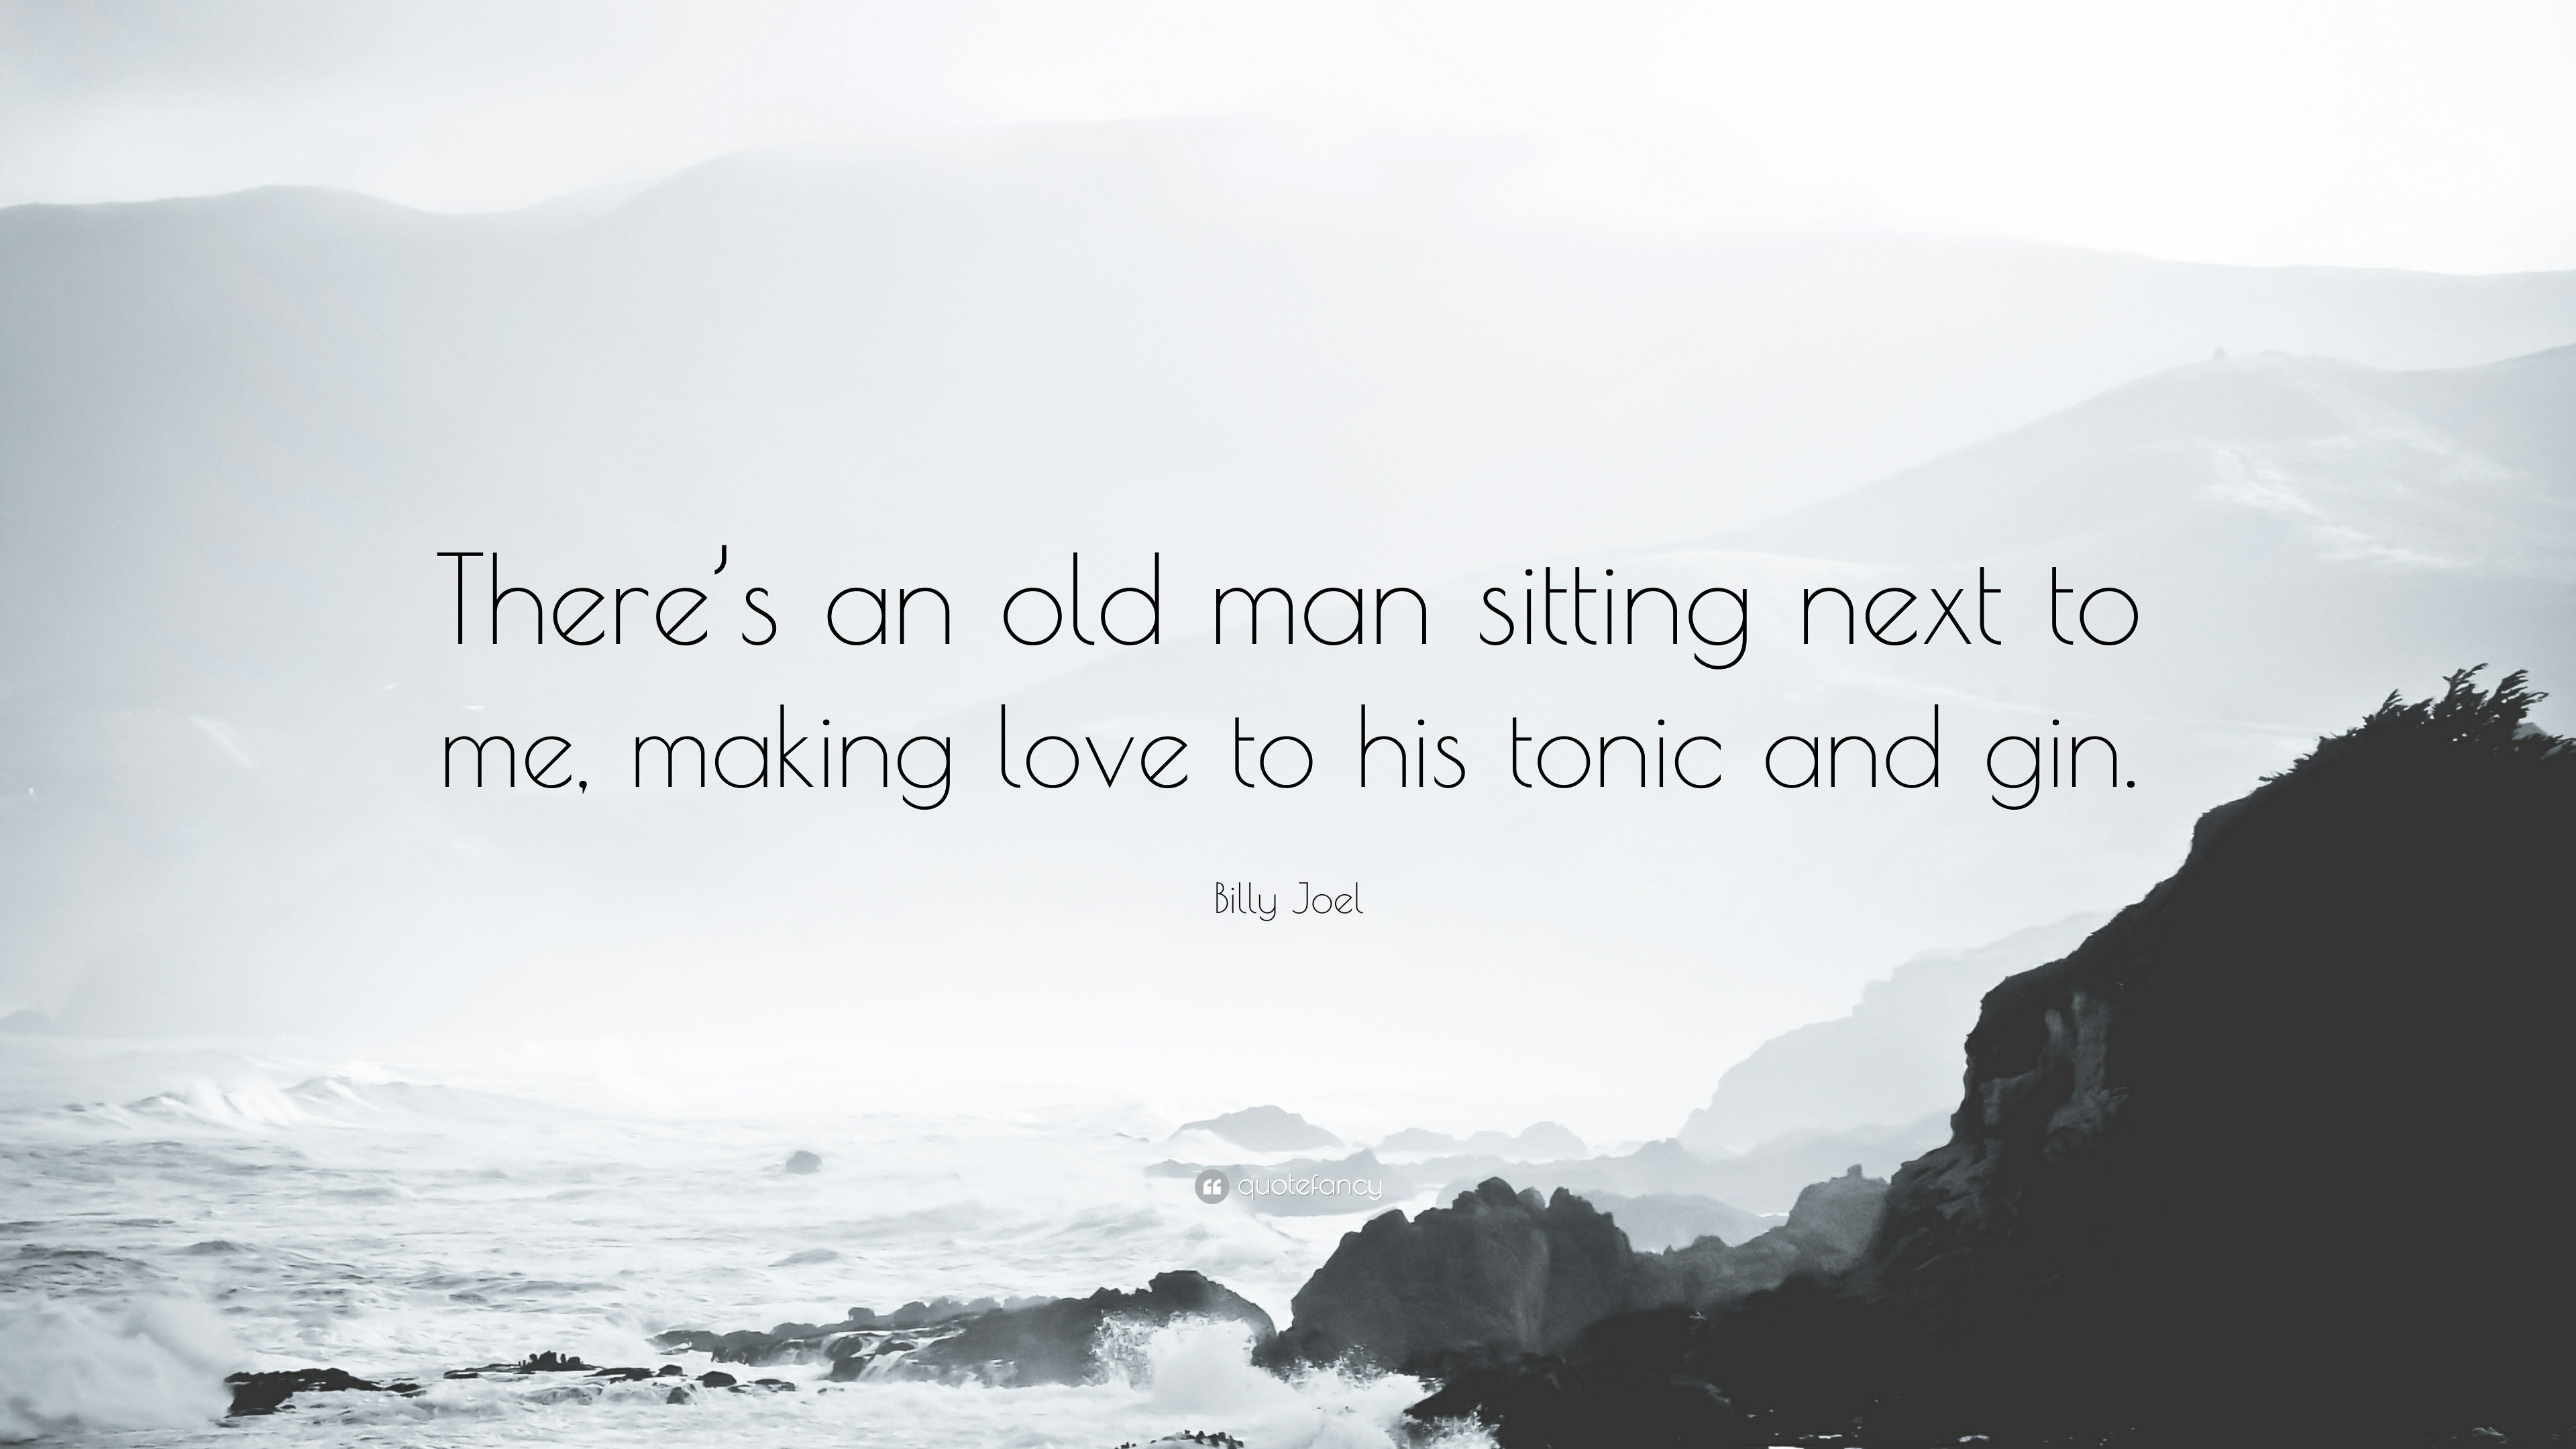 Billy Joel Quote “There s an old man sitting next to me making love